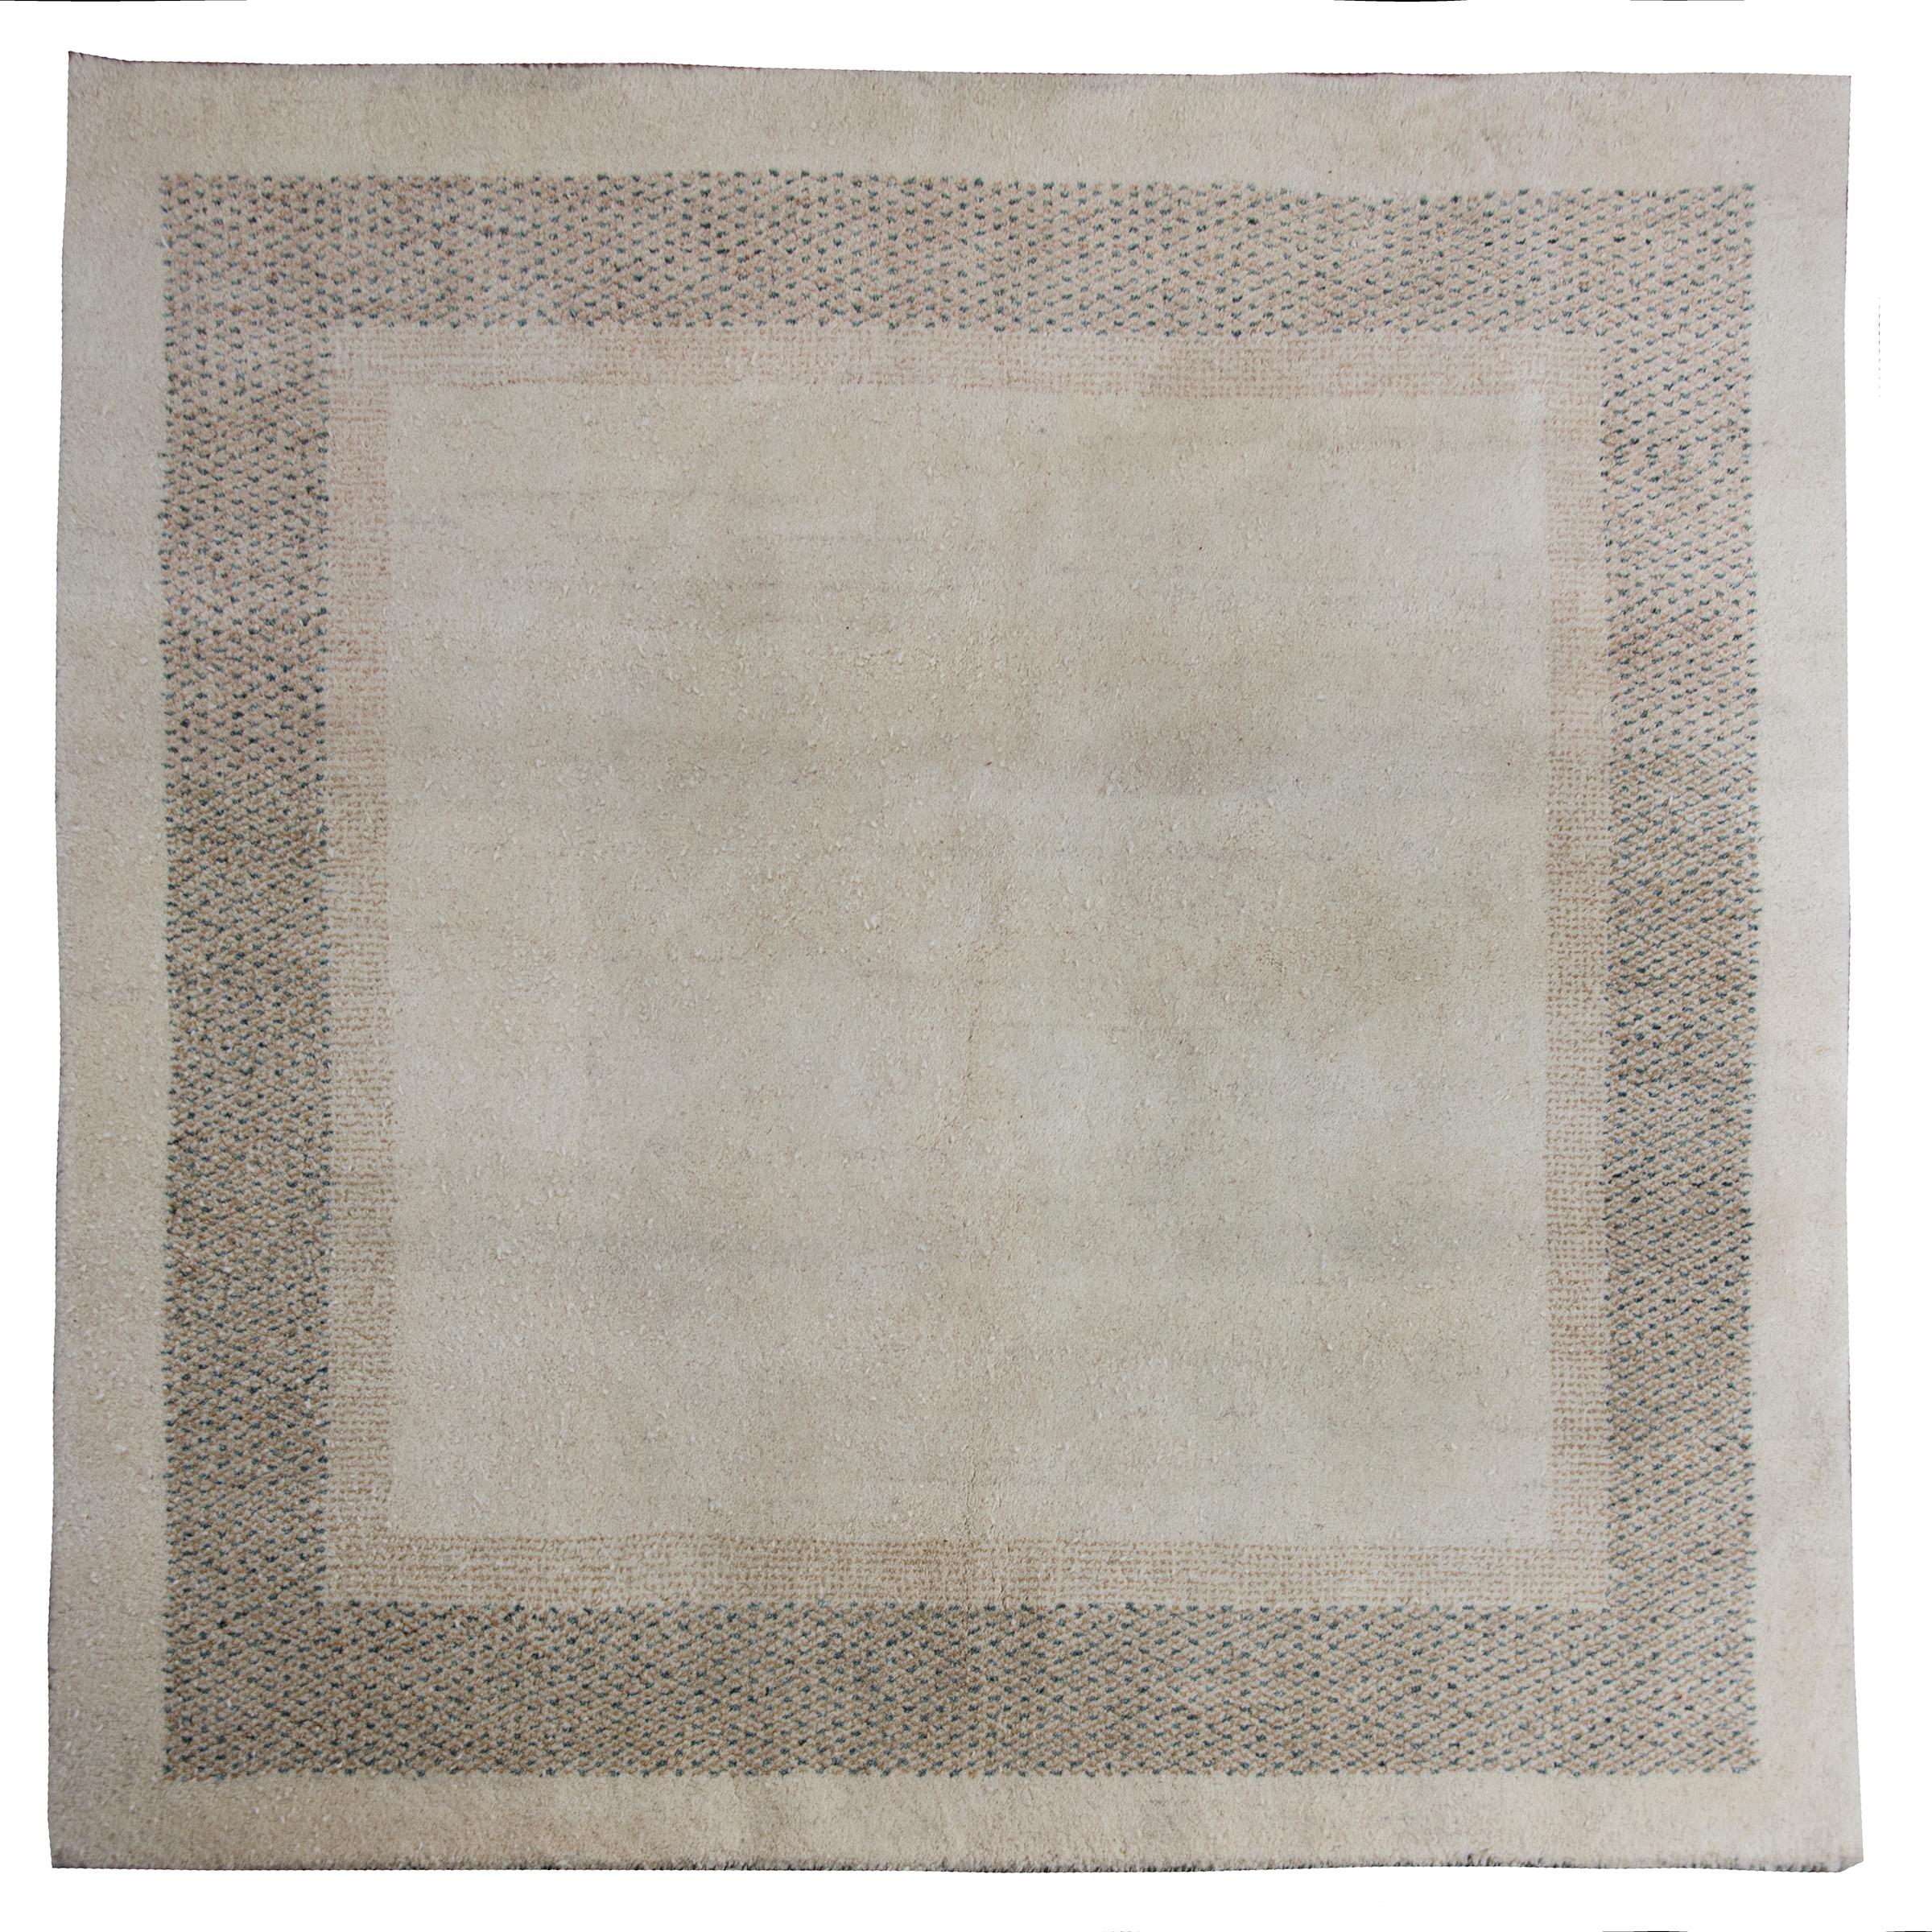 A chic late 20th century Indian Gabbeh-style rug with a solid cream field surrounded by two stippled borders woven with a dark beige and teal colored wool.